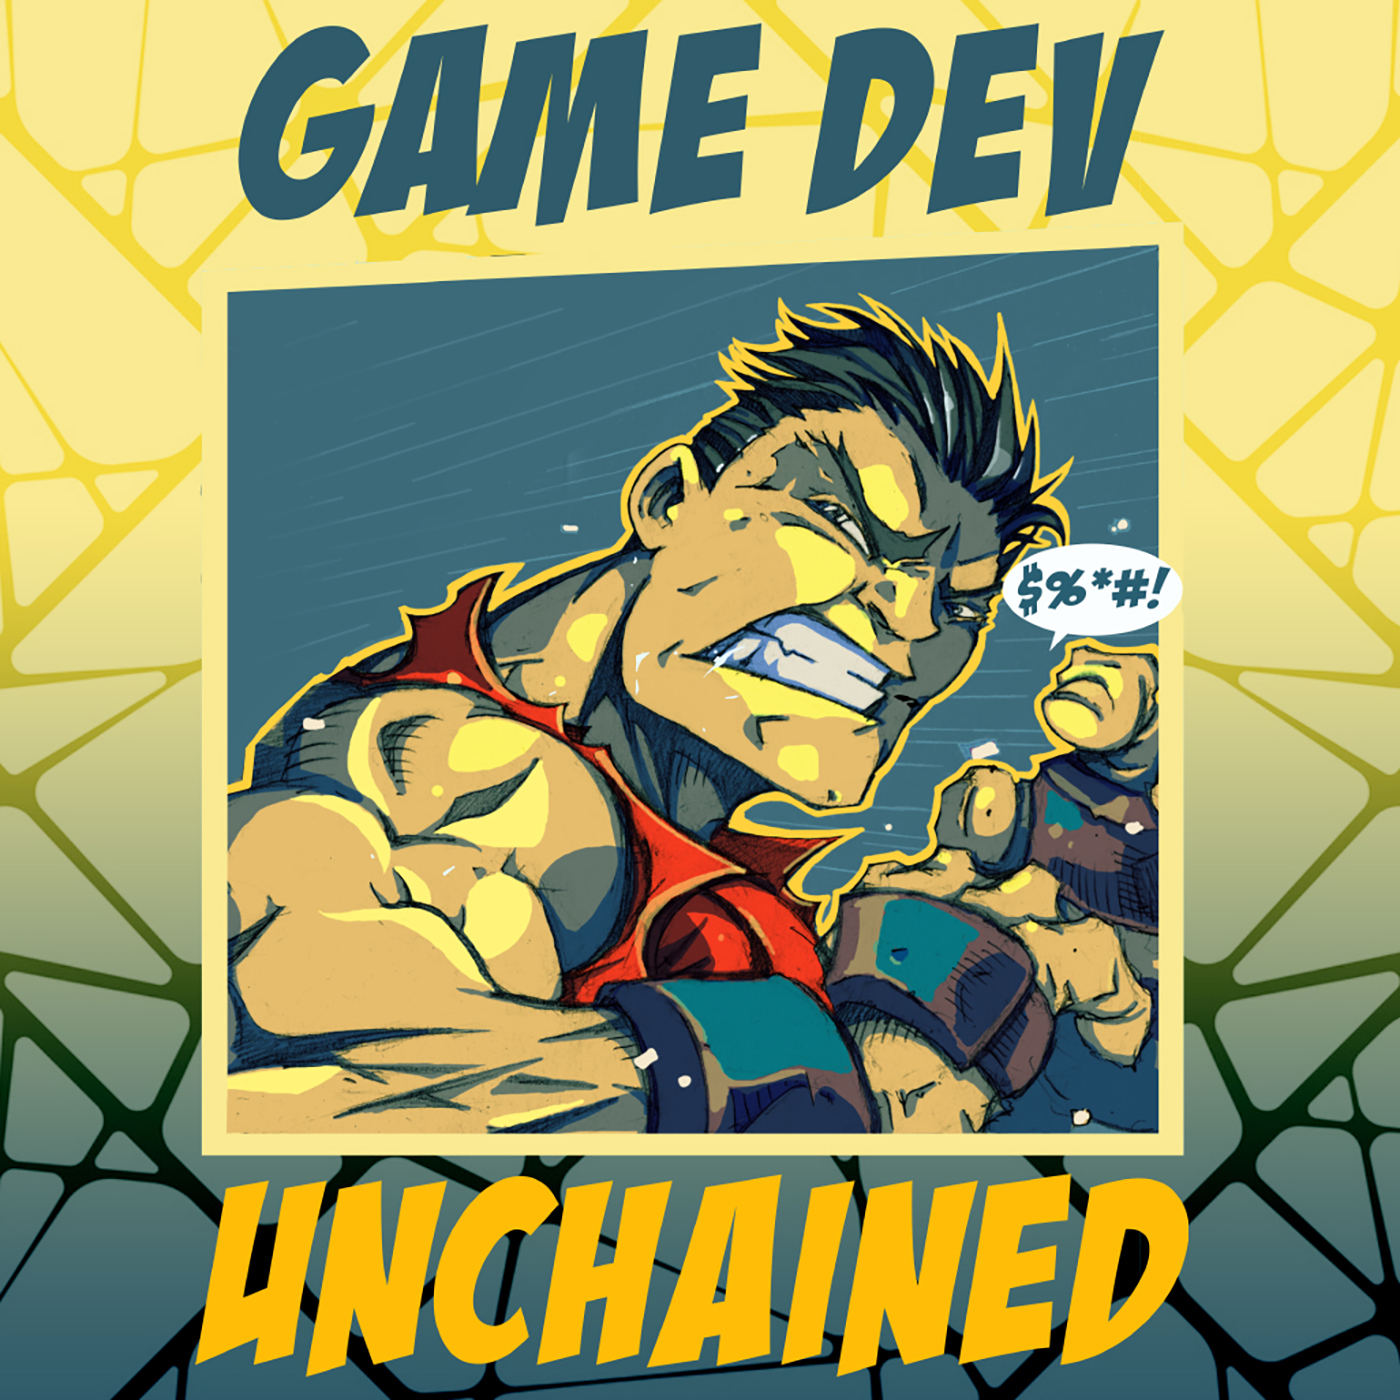 Fresh update on "$20 million" discussed on Game Dev Unchained